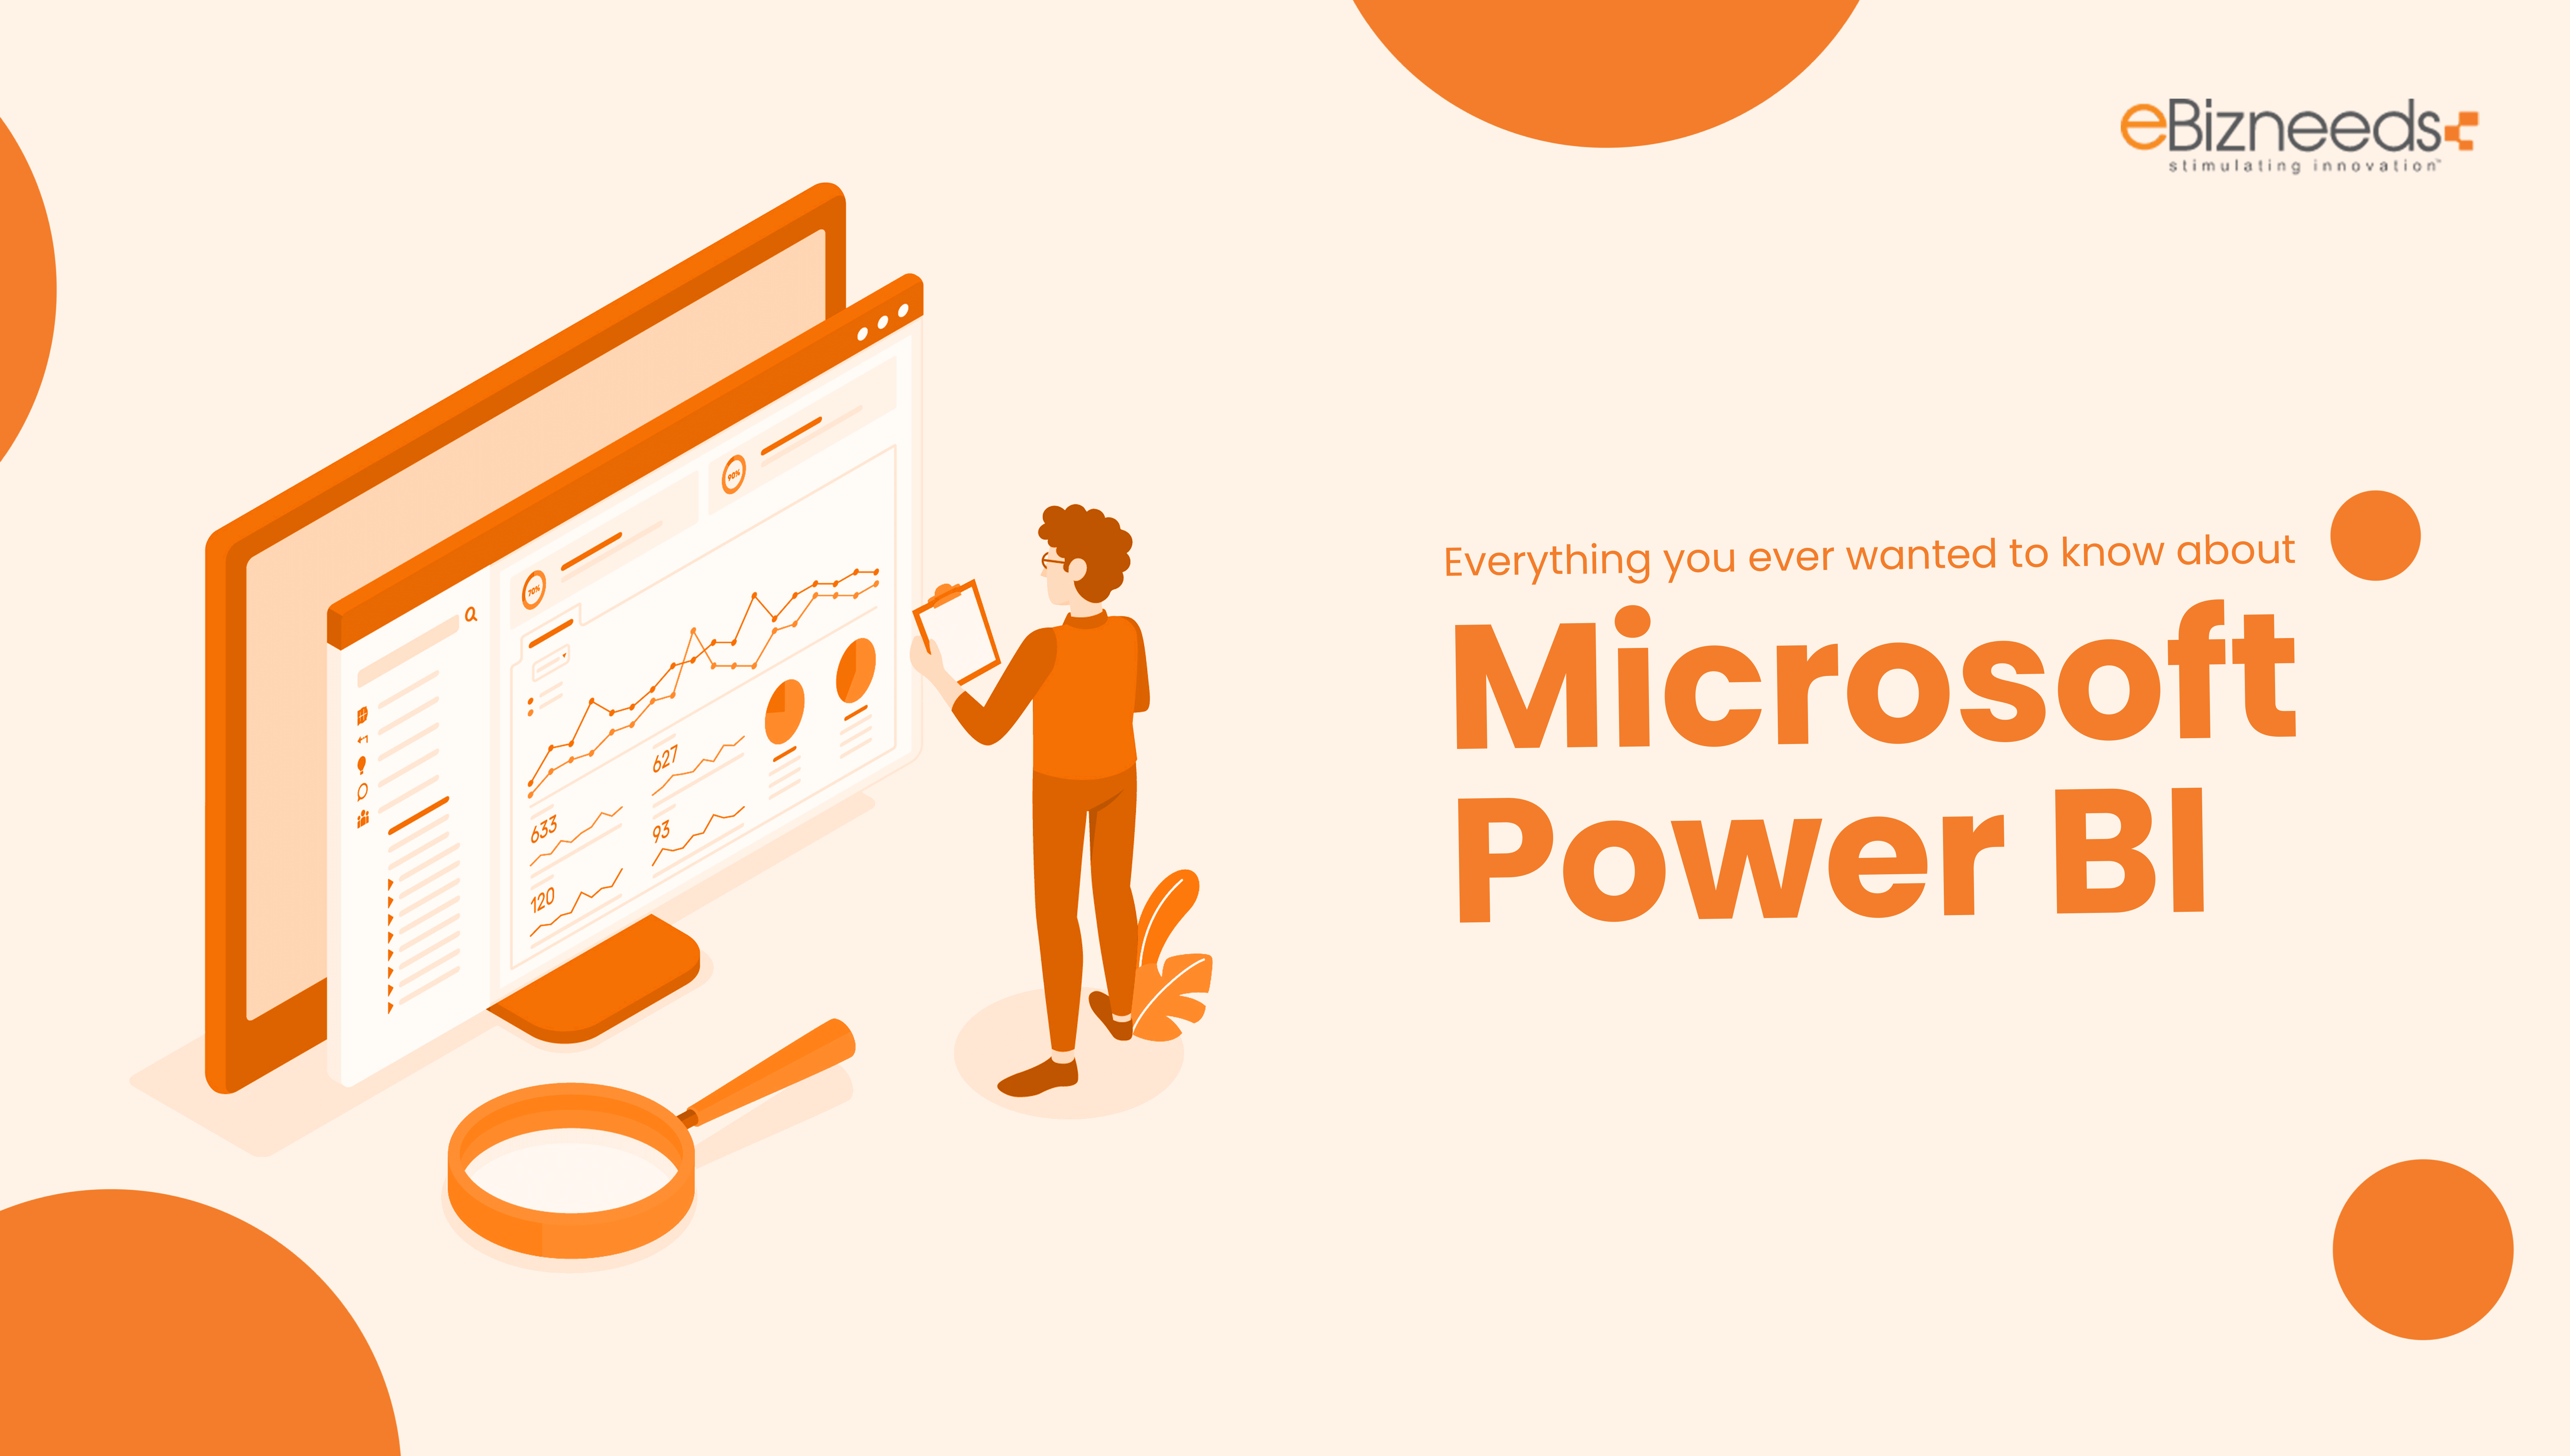 Everything you ever wanted to know about Microsoft Power BI